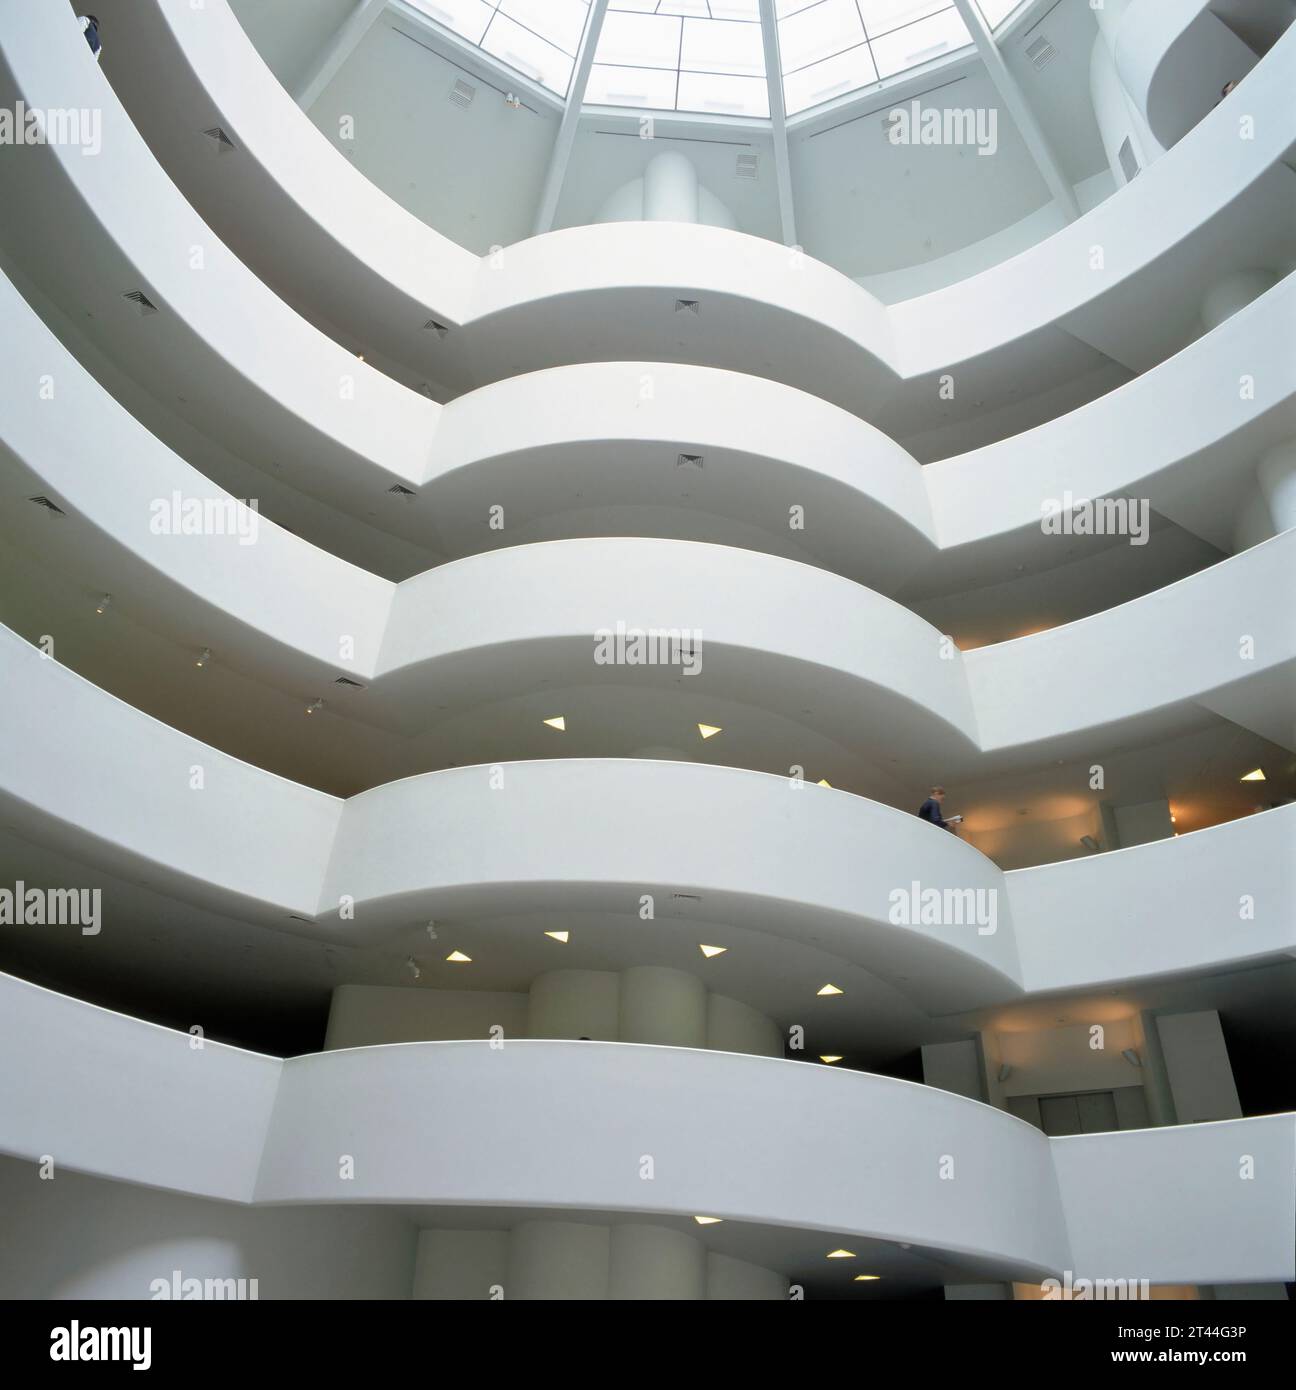 NEW YORK, USA - MAY 5, 2021: Interior of The Solomon R. Guggenheim Museum of modern and contemporary art. The Museum is situated in Manhattan's Upper Stock Photo